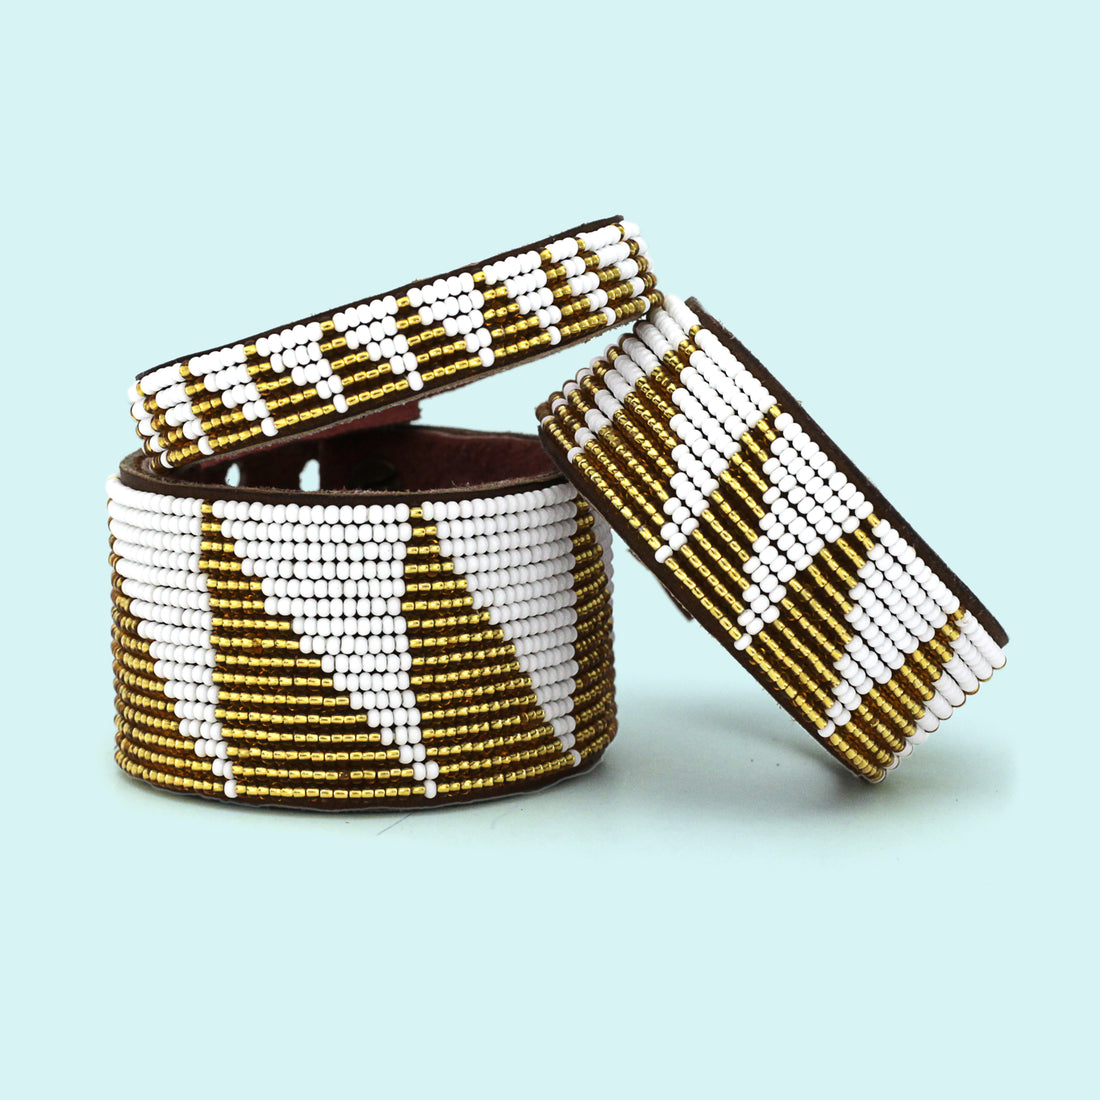 Tri Gold and White Beaded Leather Cuff